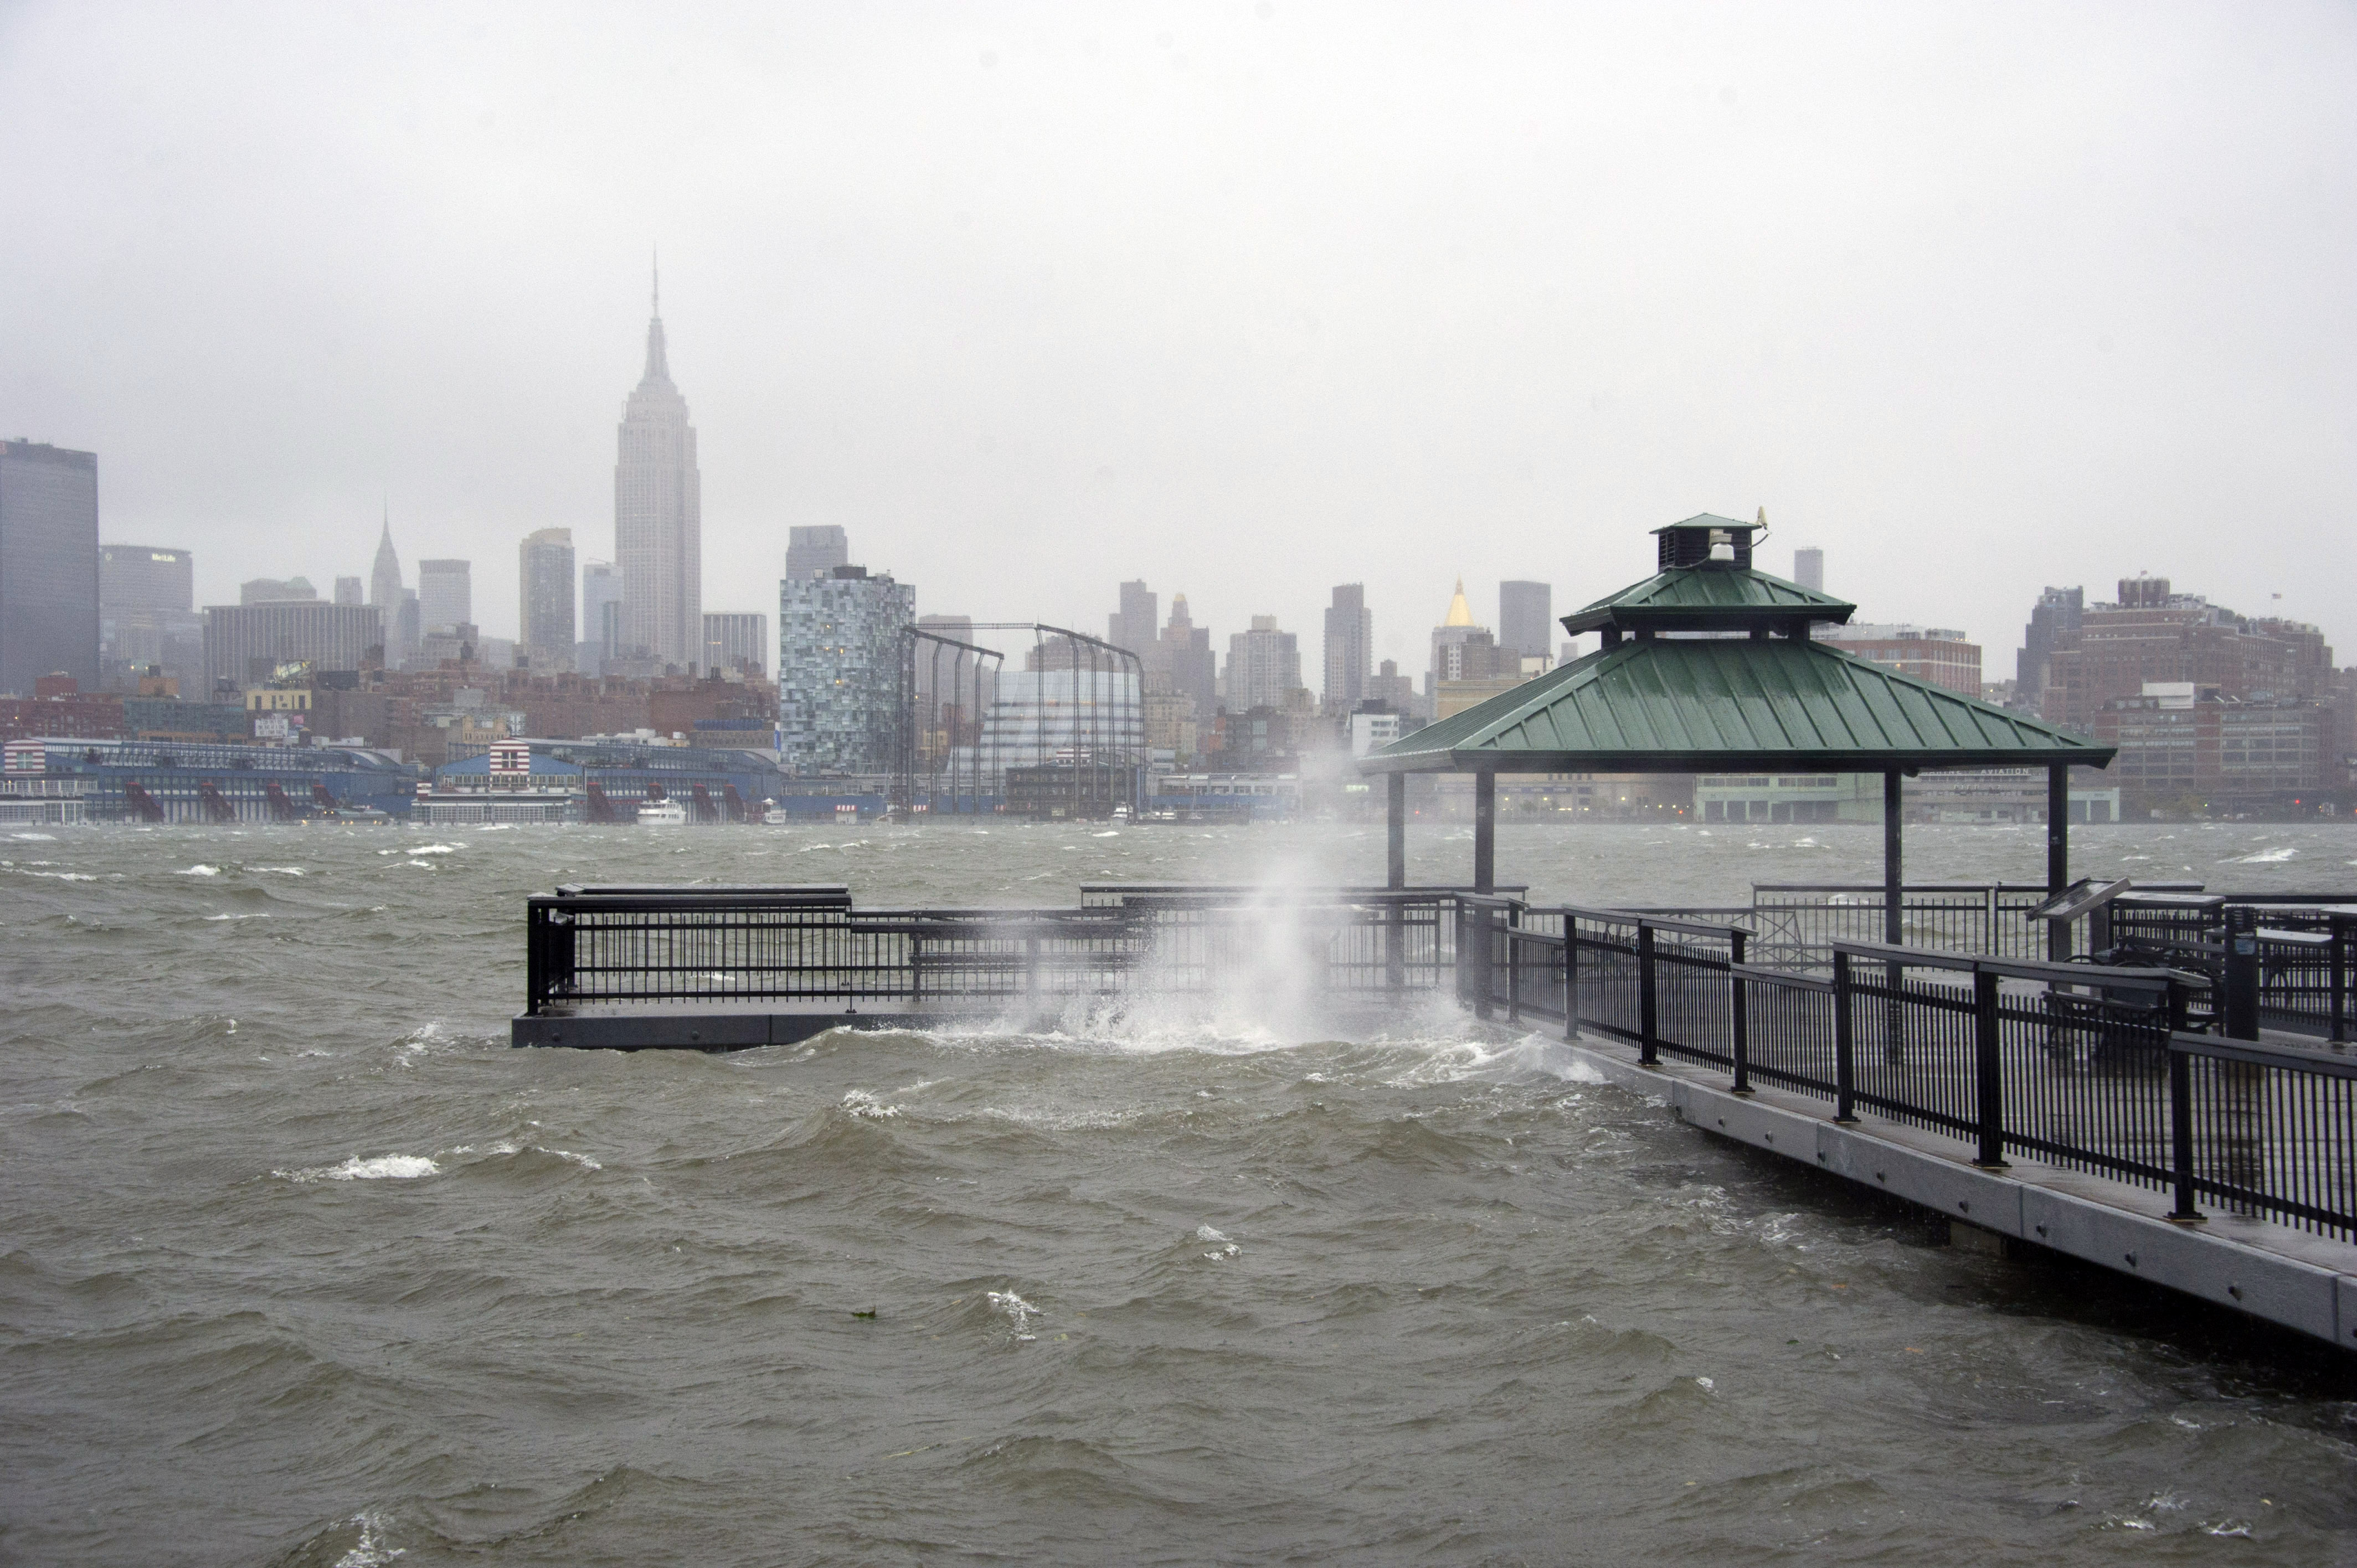 Superstorm Sandy legacy: Recovery far from equal on NY shore